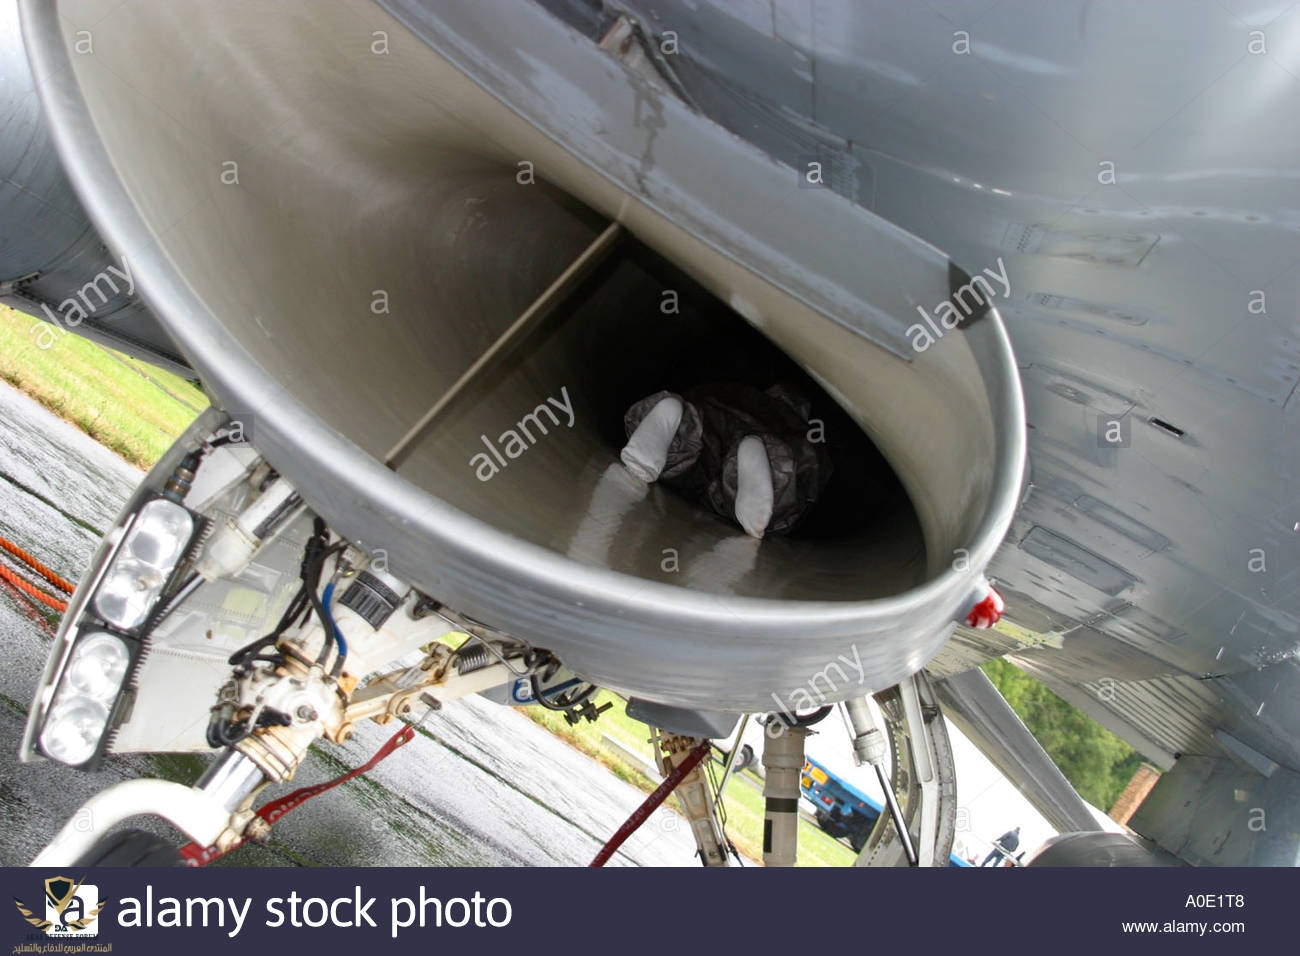 pilot-inspecting-jet-air-intake-on-f16-fighter-plane-A0E1T8.jpg